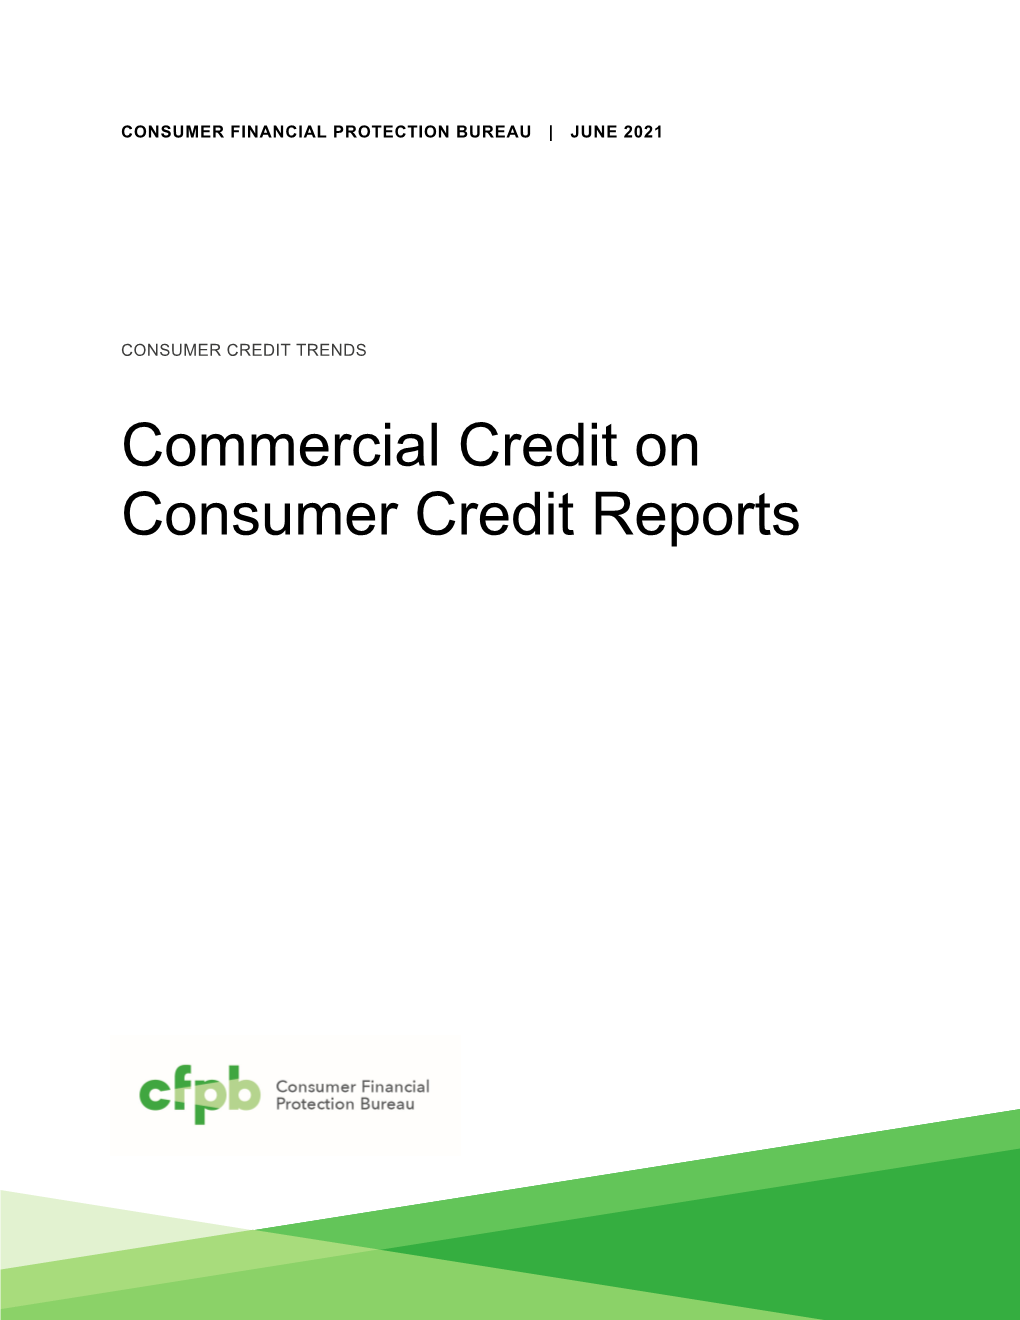 Commercial Credit on Consumer Credit Reports